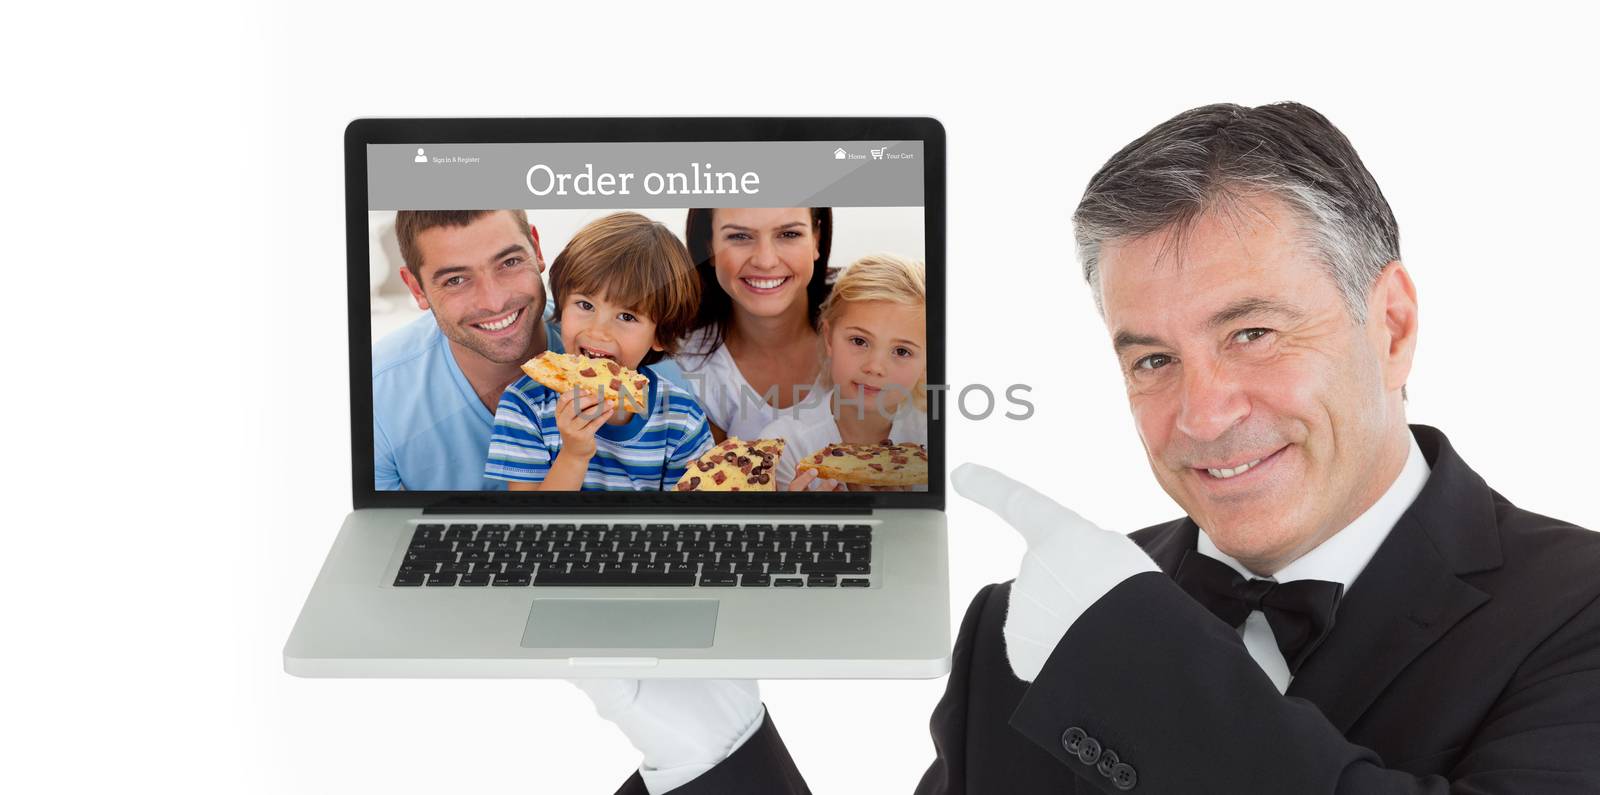 Smiling waiter pointing us something on a laptop against food app